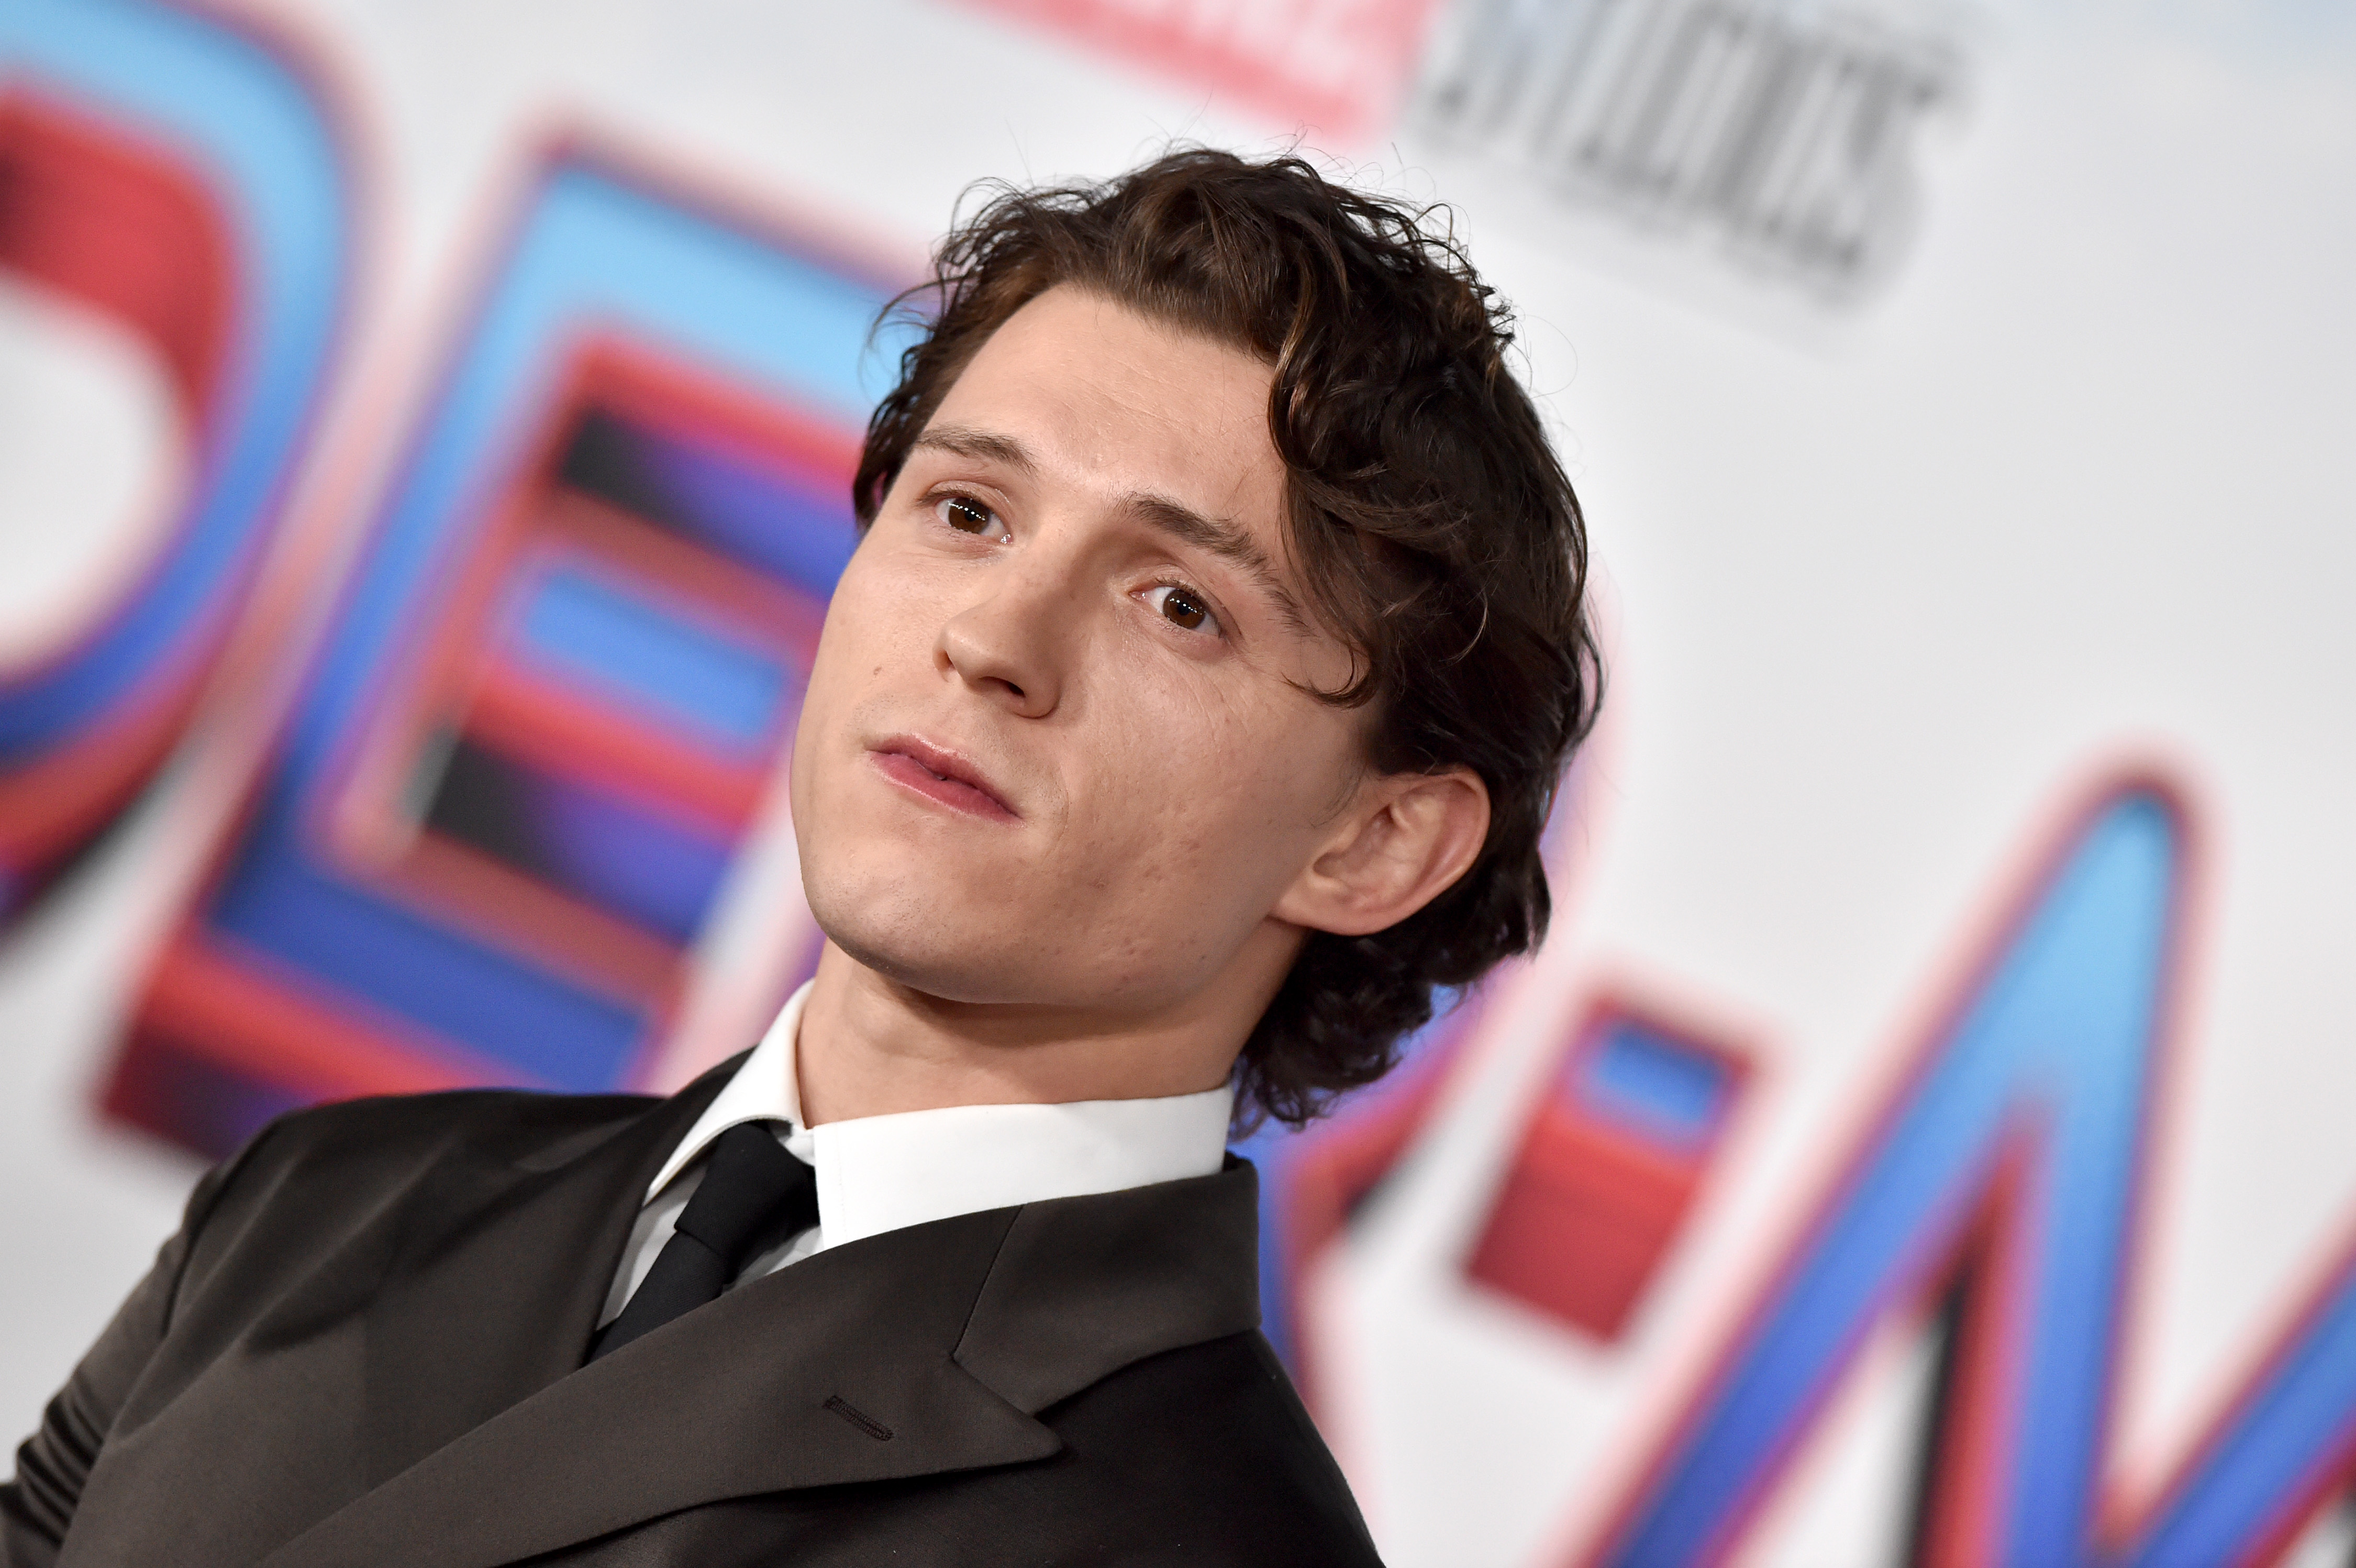 Tom Holland, who is seen in behind-the-scenes content on the 'Spider-Man: No Way Home' Blu-ray, wears a dark gray suit over a white button-up shirt and black tie.